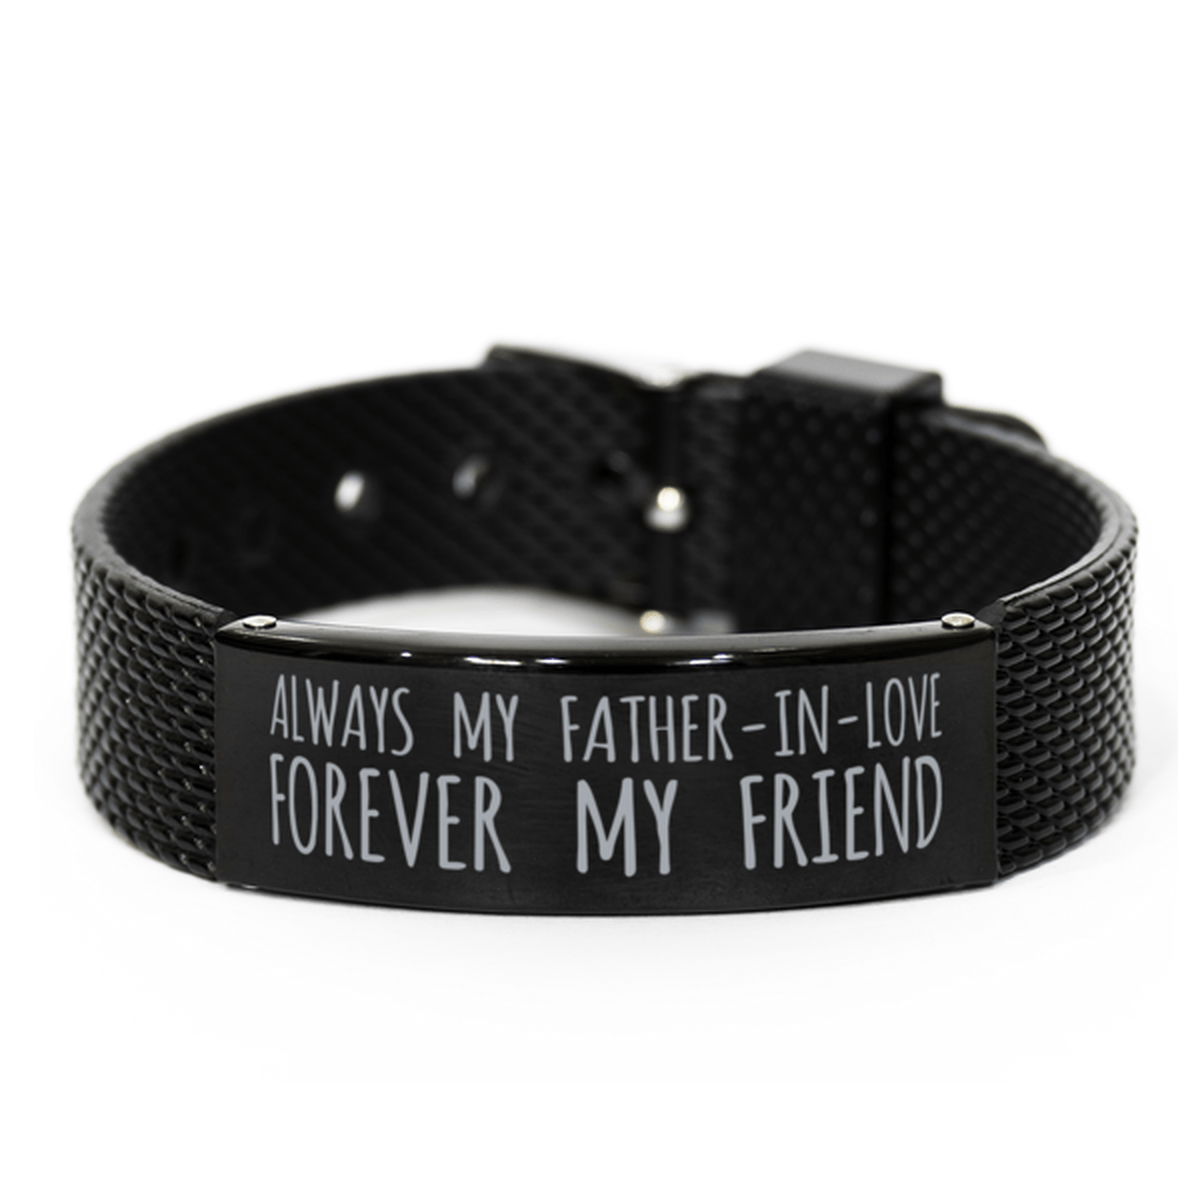 Inspirational Father in Love Black Shark Mesh Bracelet, Always My Father in Love Forever My Friend, Best Birthday Gifts for Family Friends